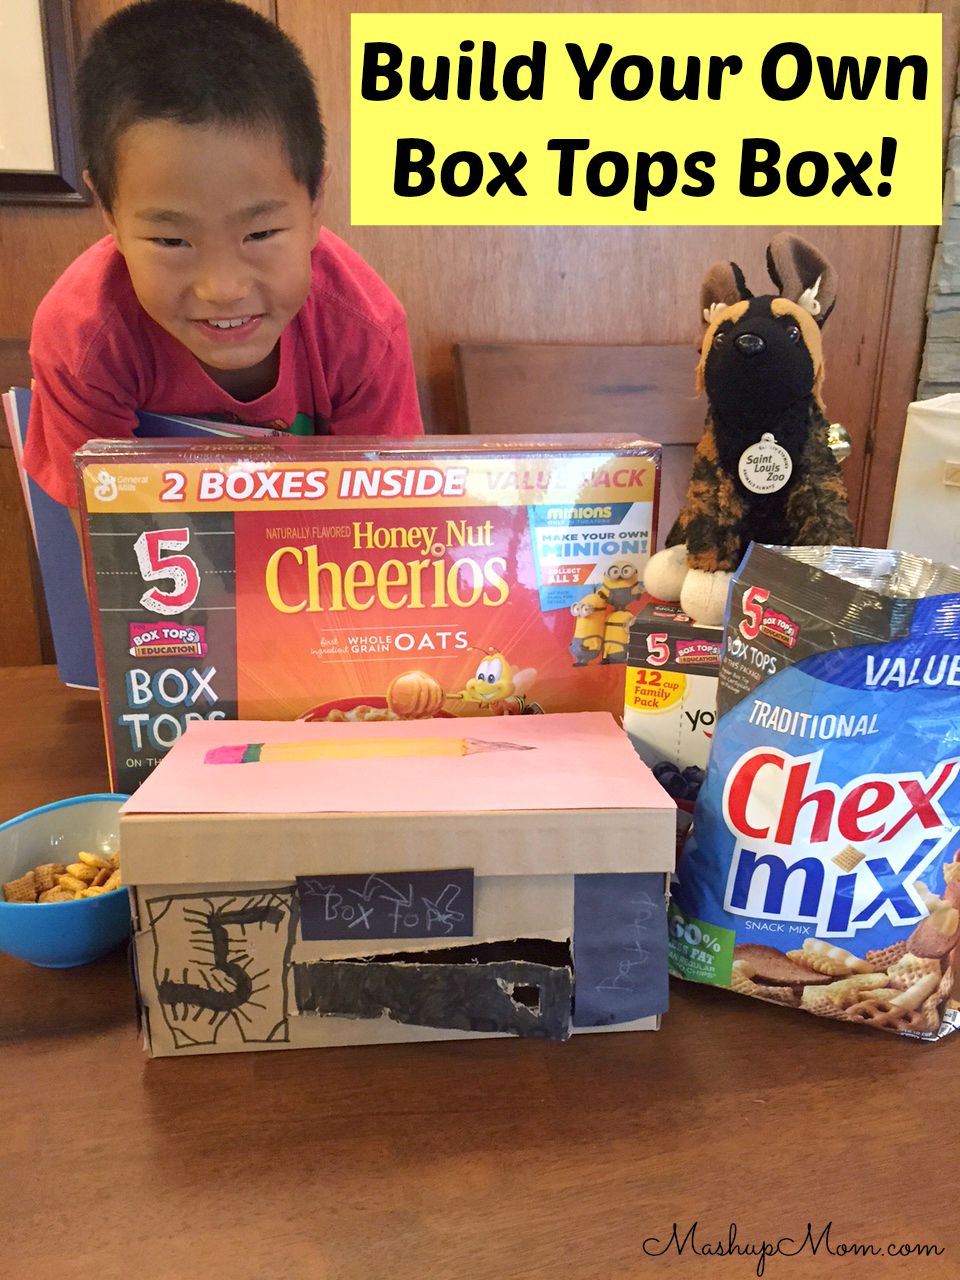 build-your-own-box-tops-box